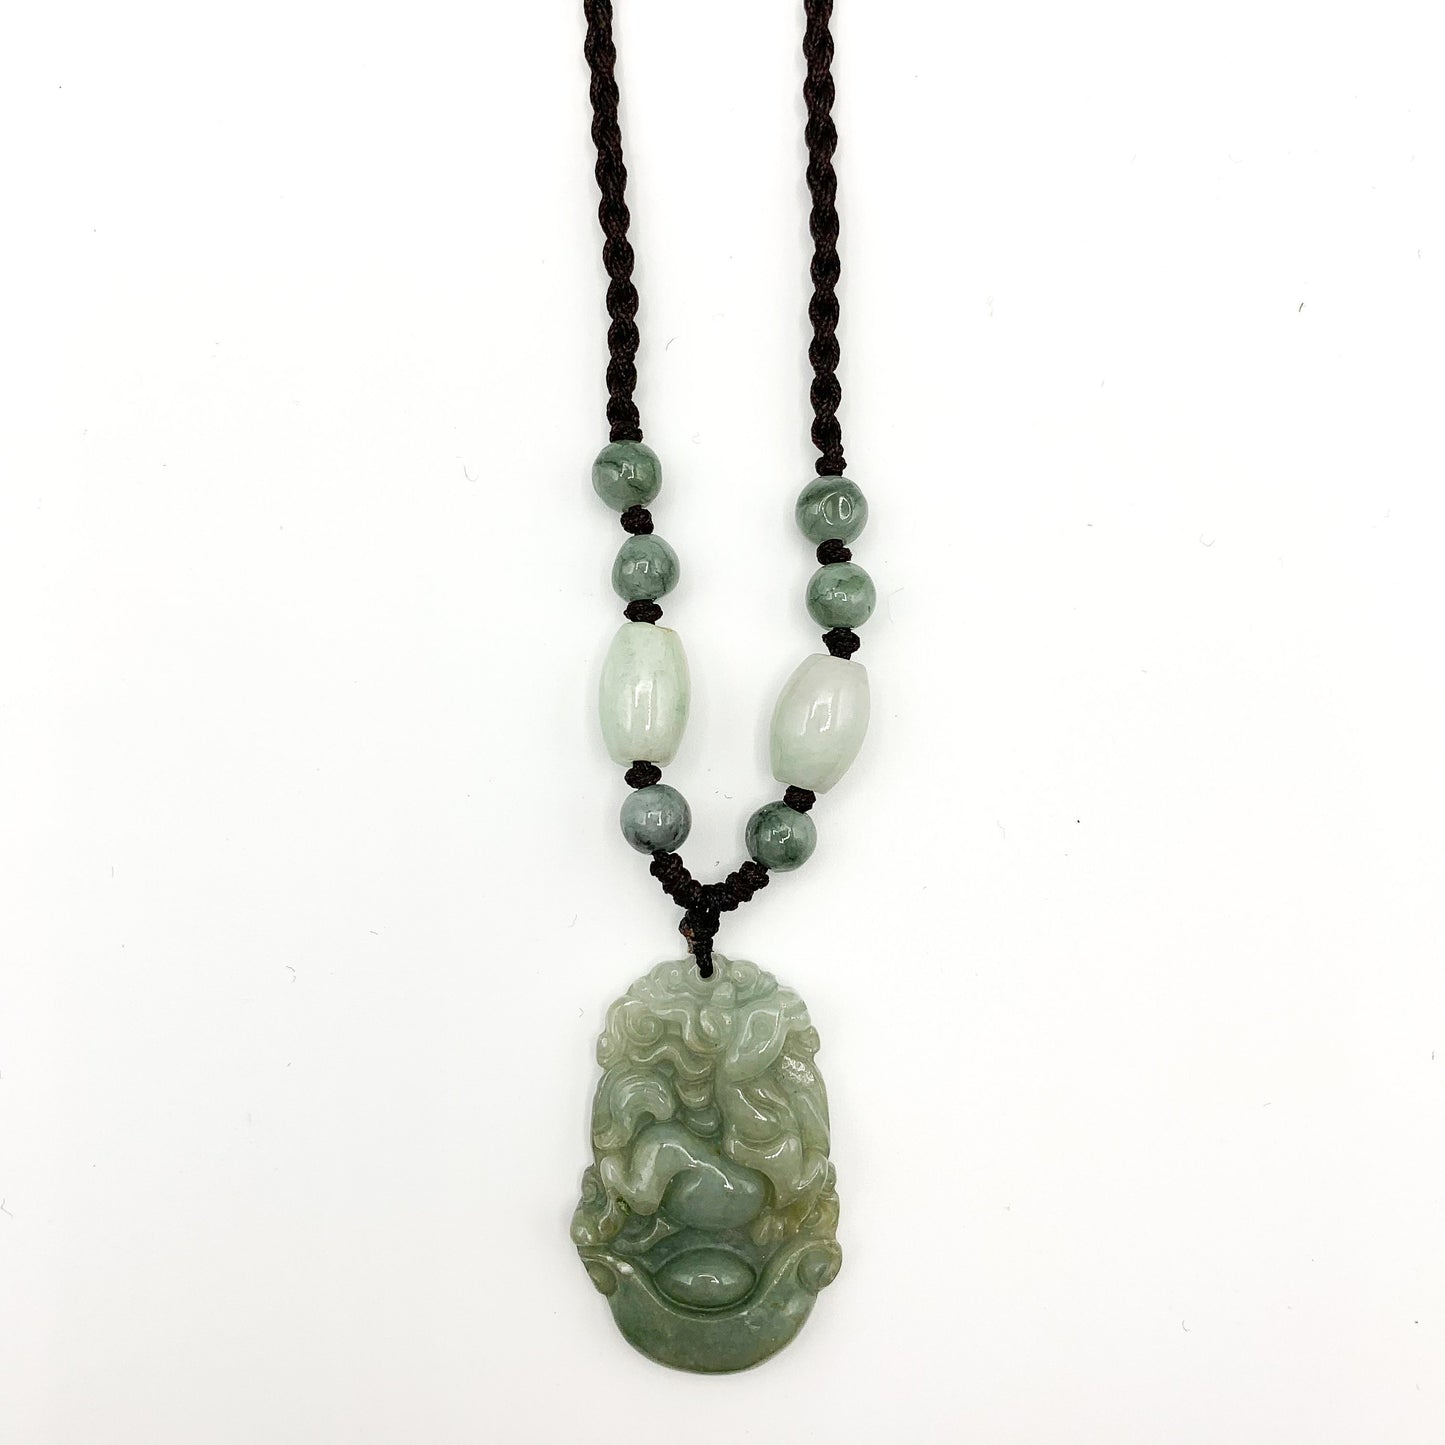 Horse Jadeite Chinese Zodiac Rustic Carved Pendant Necklace, YW-0110-1646545148 - AriaDesignCollection